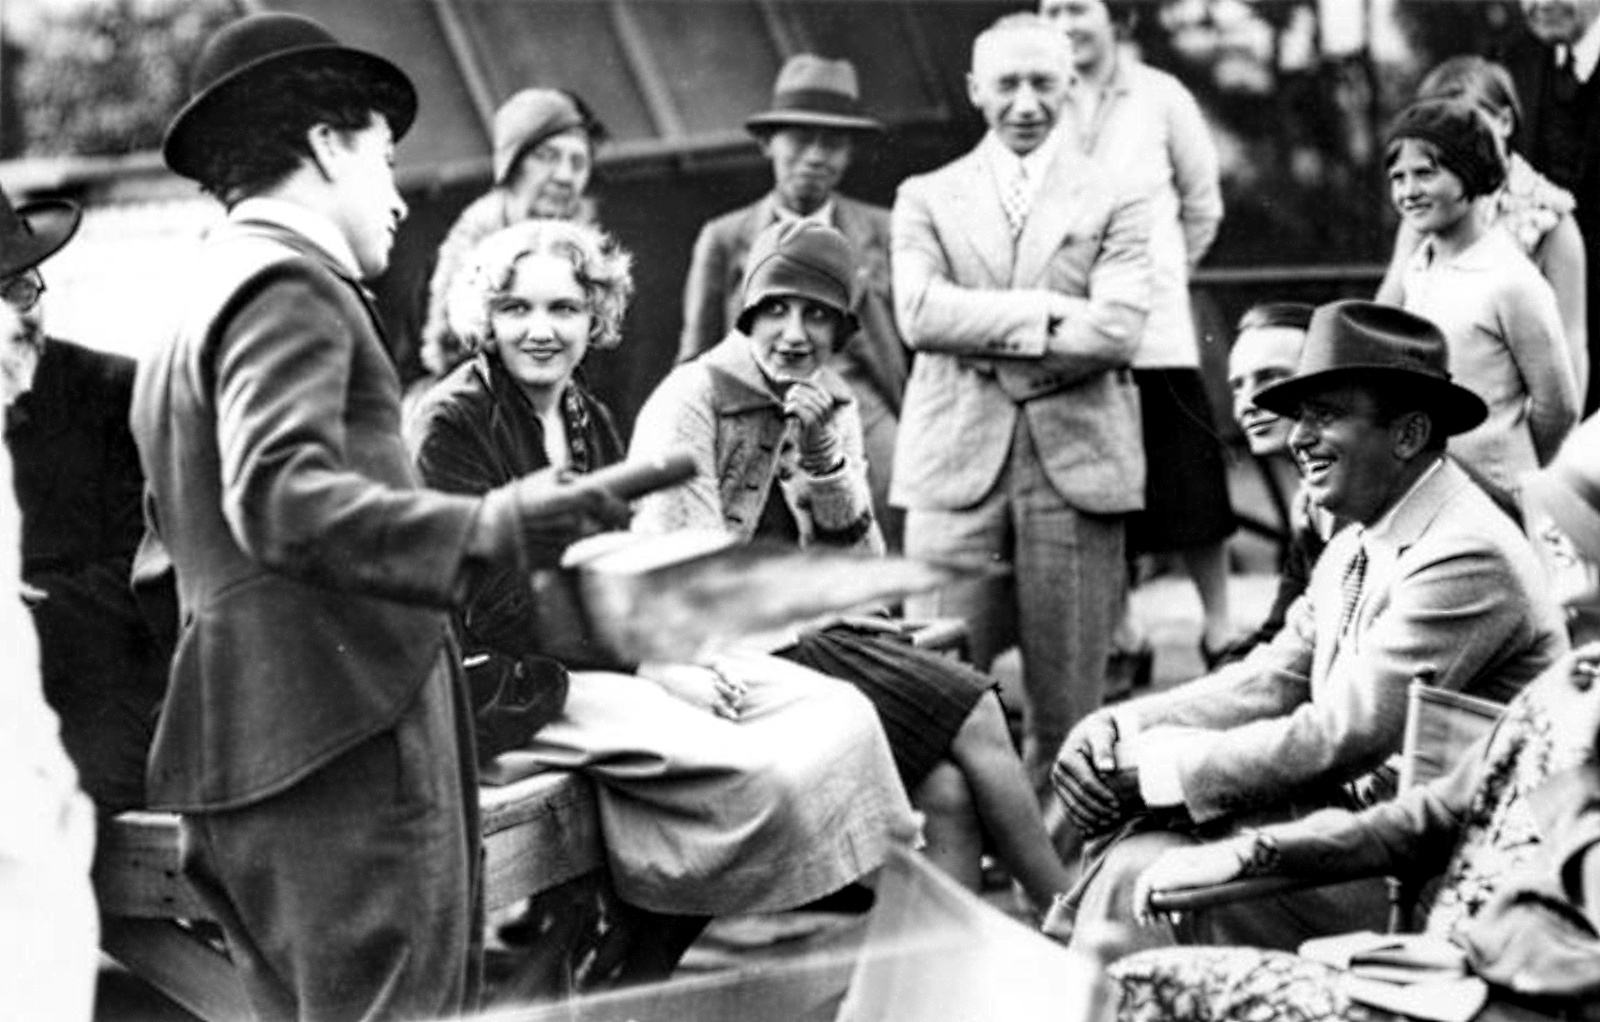 Doug Fairbanks (right) visits Chaplin on the City Lights set, creating a rare moment of good humor on the troubled shoot.